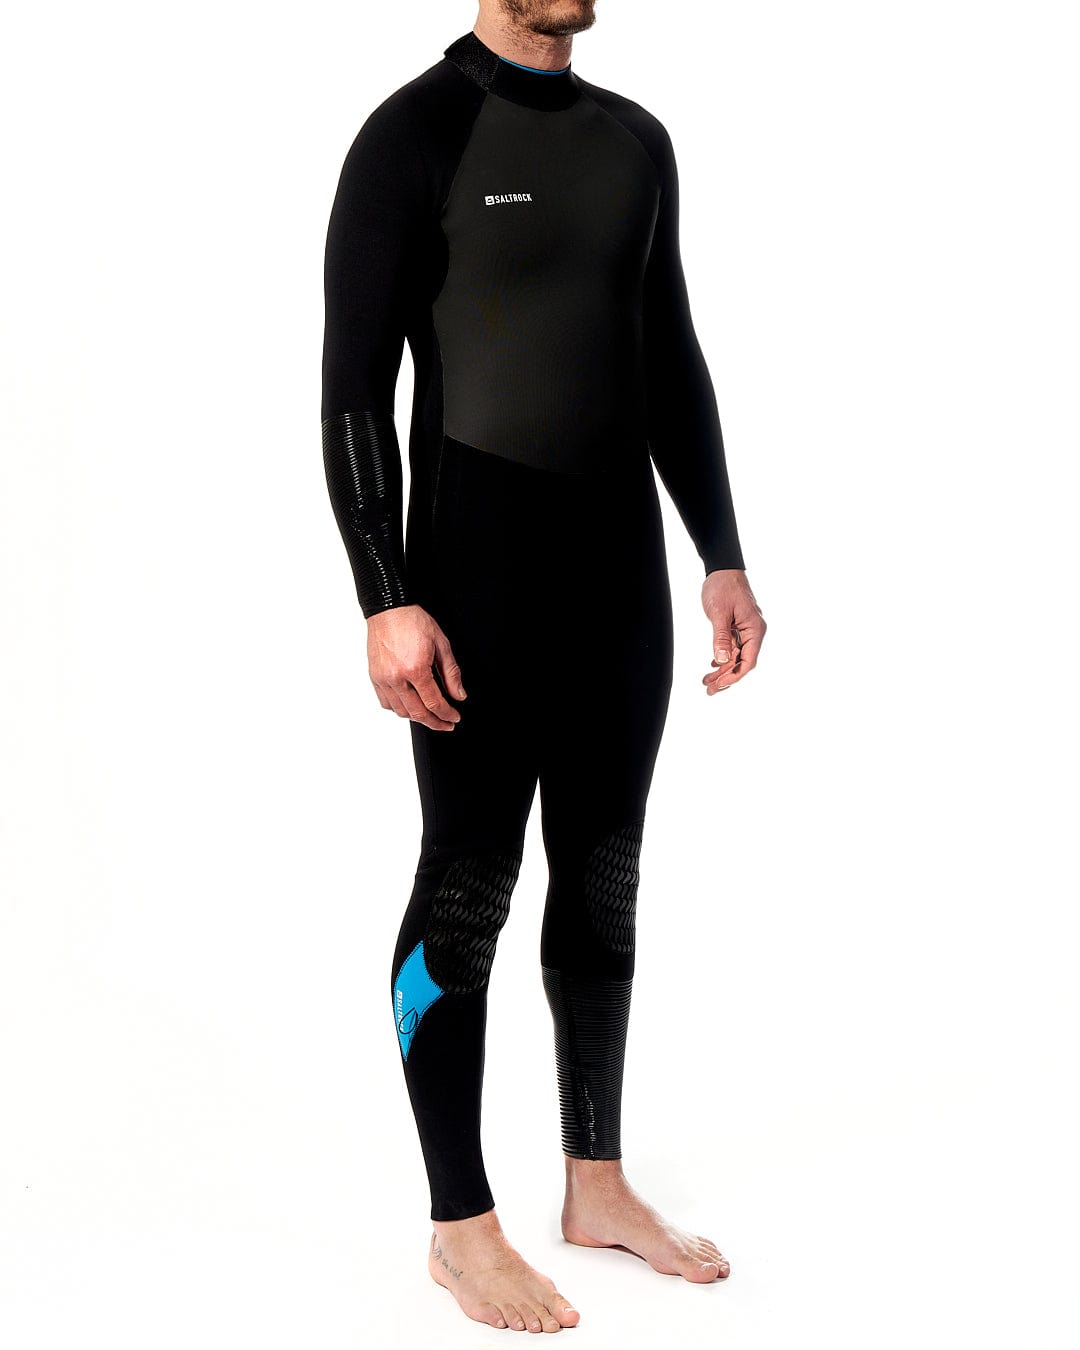 A man in a Saltrock Synthesis - Mens 4/3 Back Zip Full Wetsuit - Black standing on a white background.